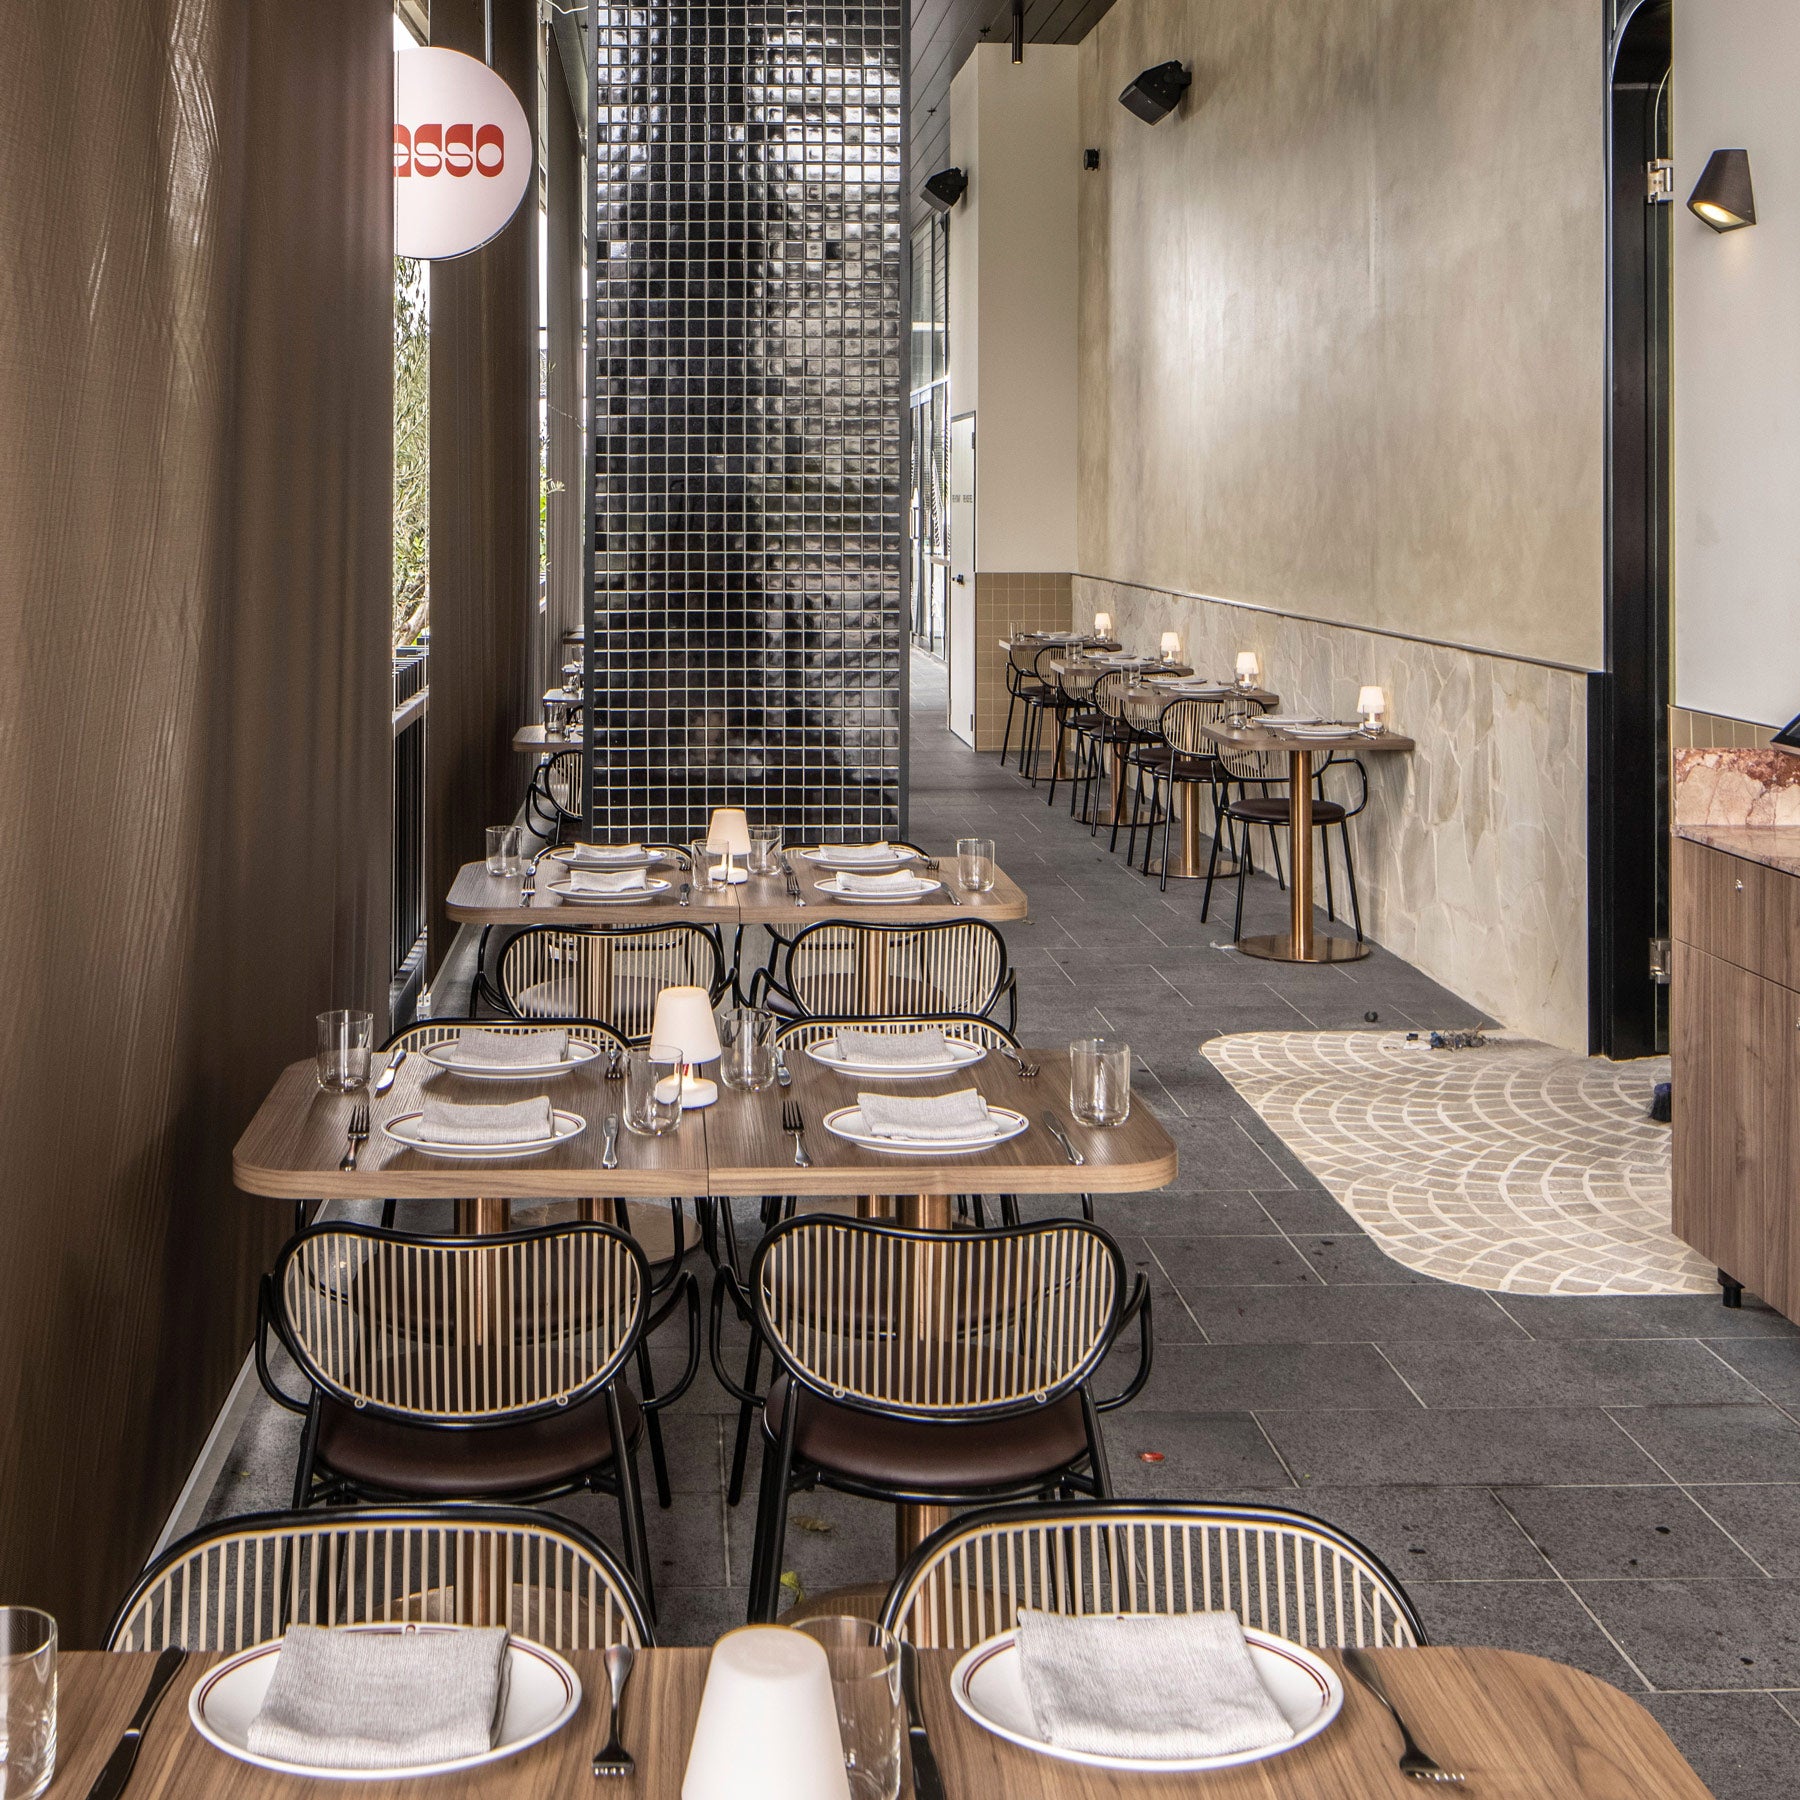 Piper Chairs Leather Seat Pad at Sasso Italiano by Collectivus | DesignByThem